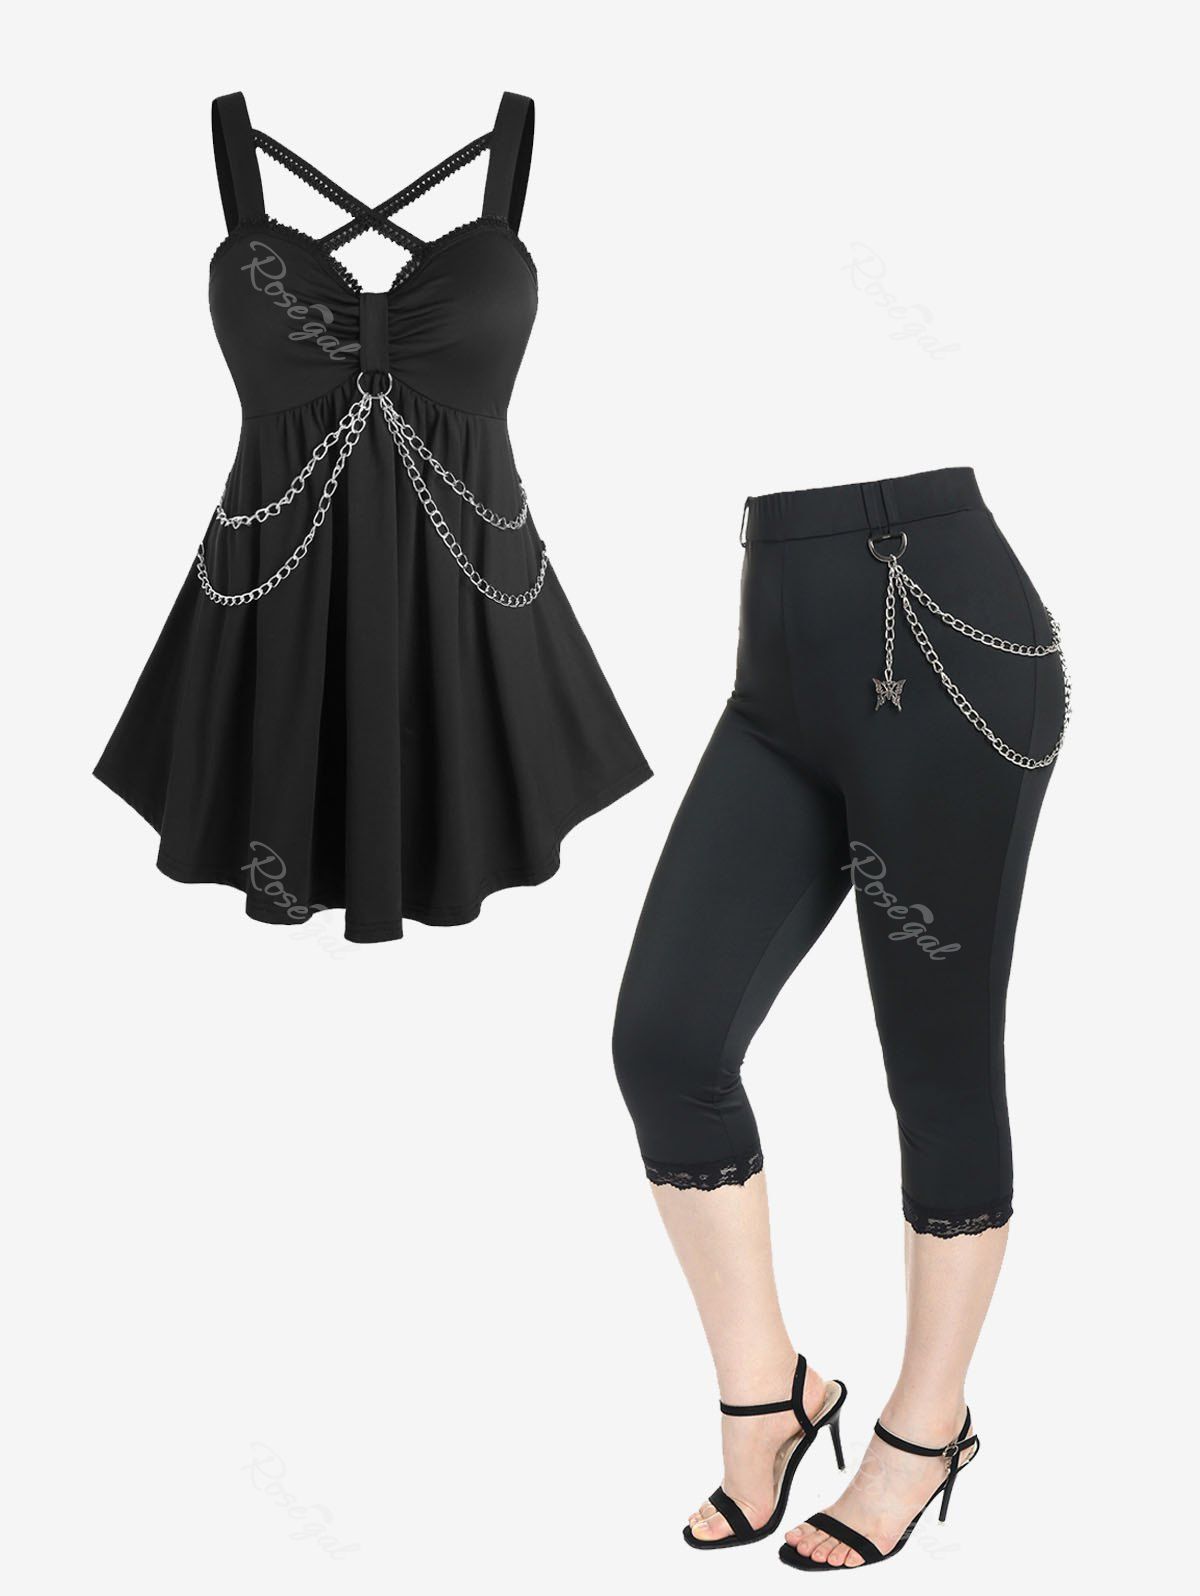 Outfits Backless Chains Cross Solid Gothic Tank Top and Chains Lace Trim Leggings Plus Size Summer Outfit  